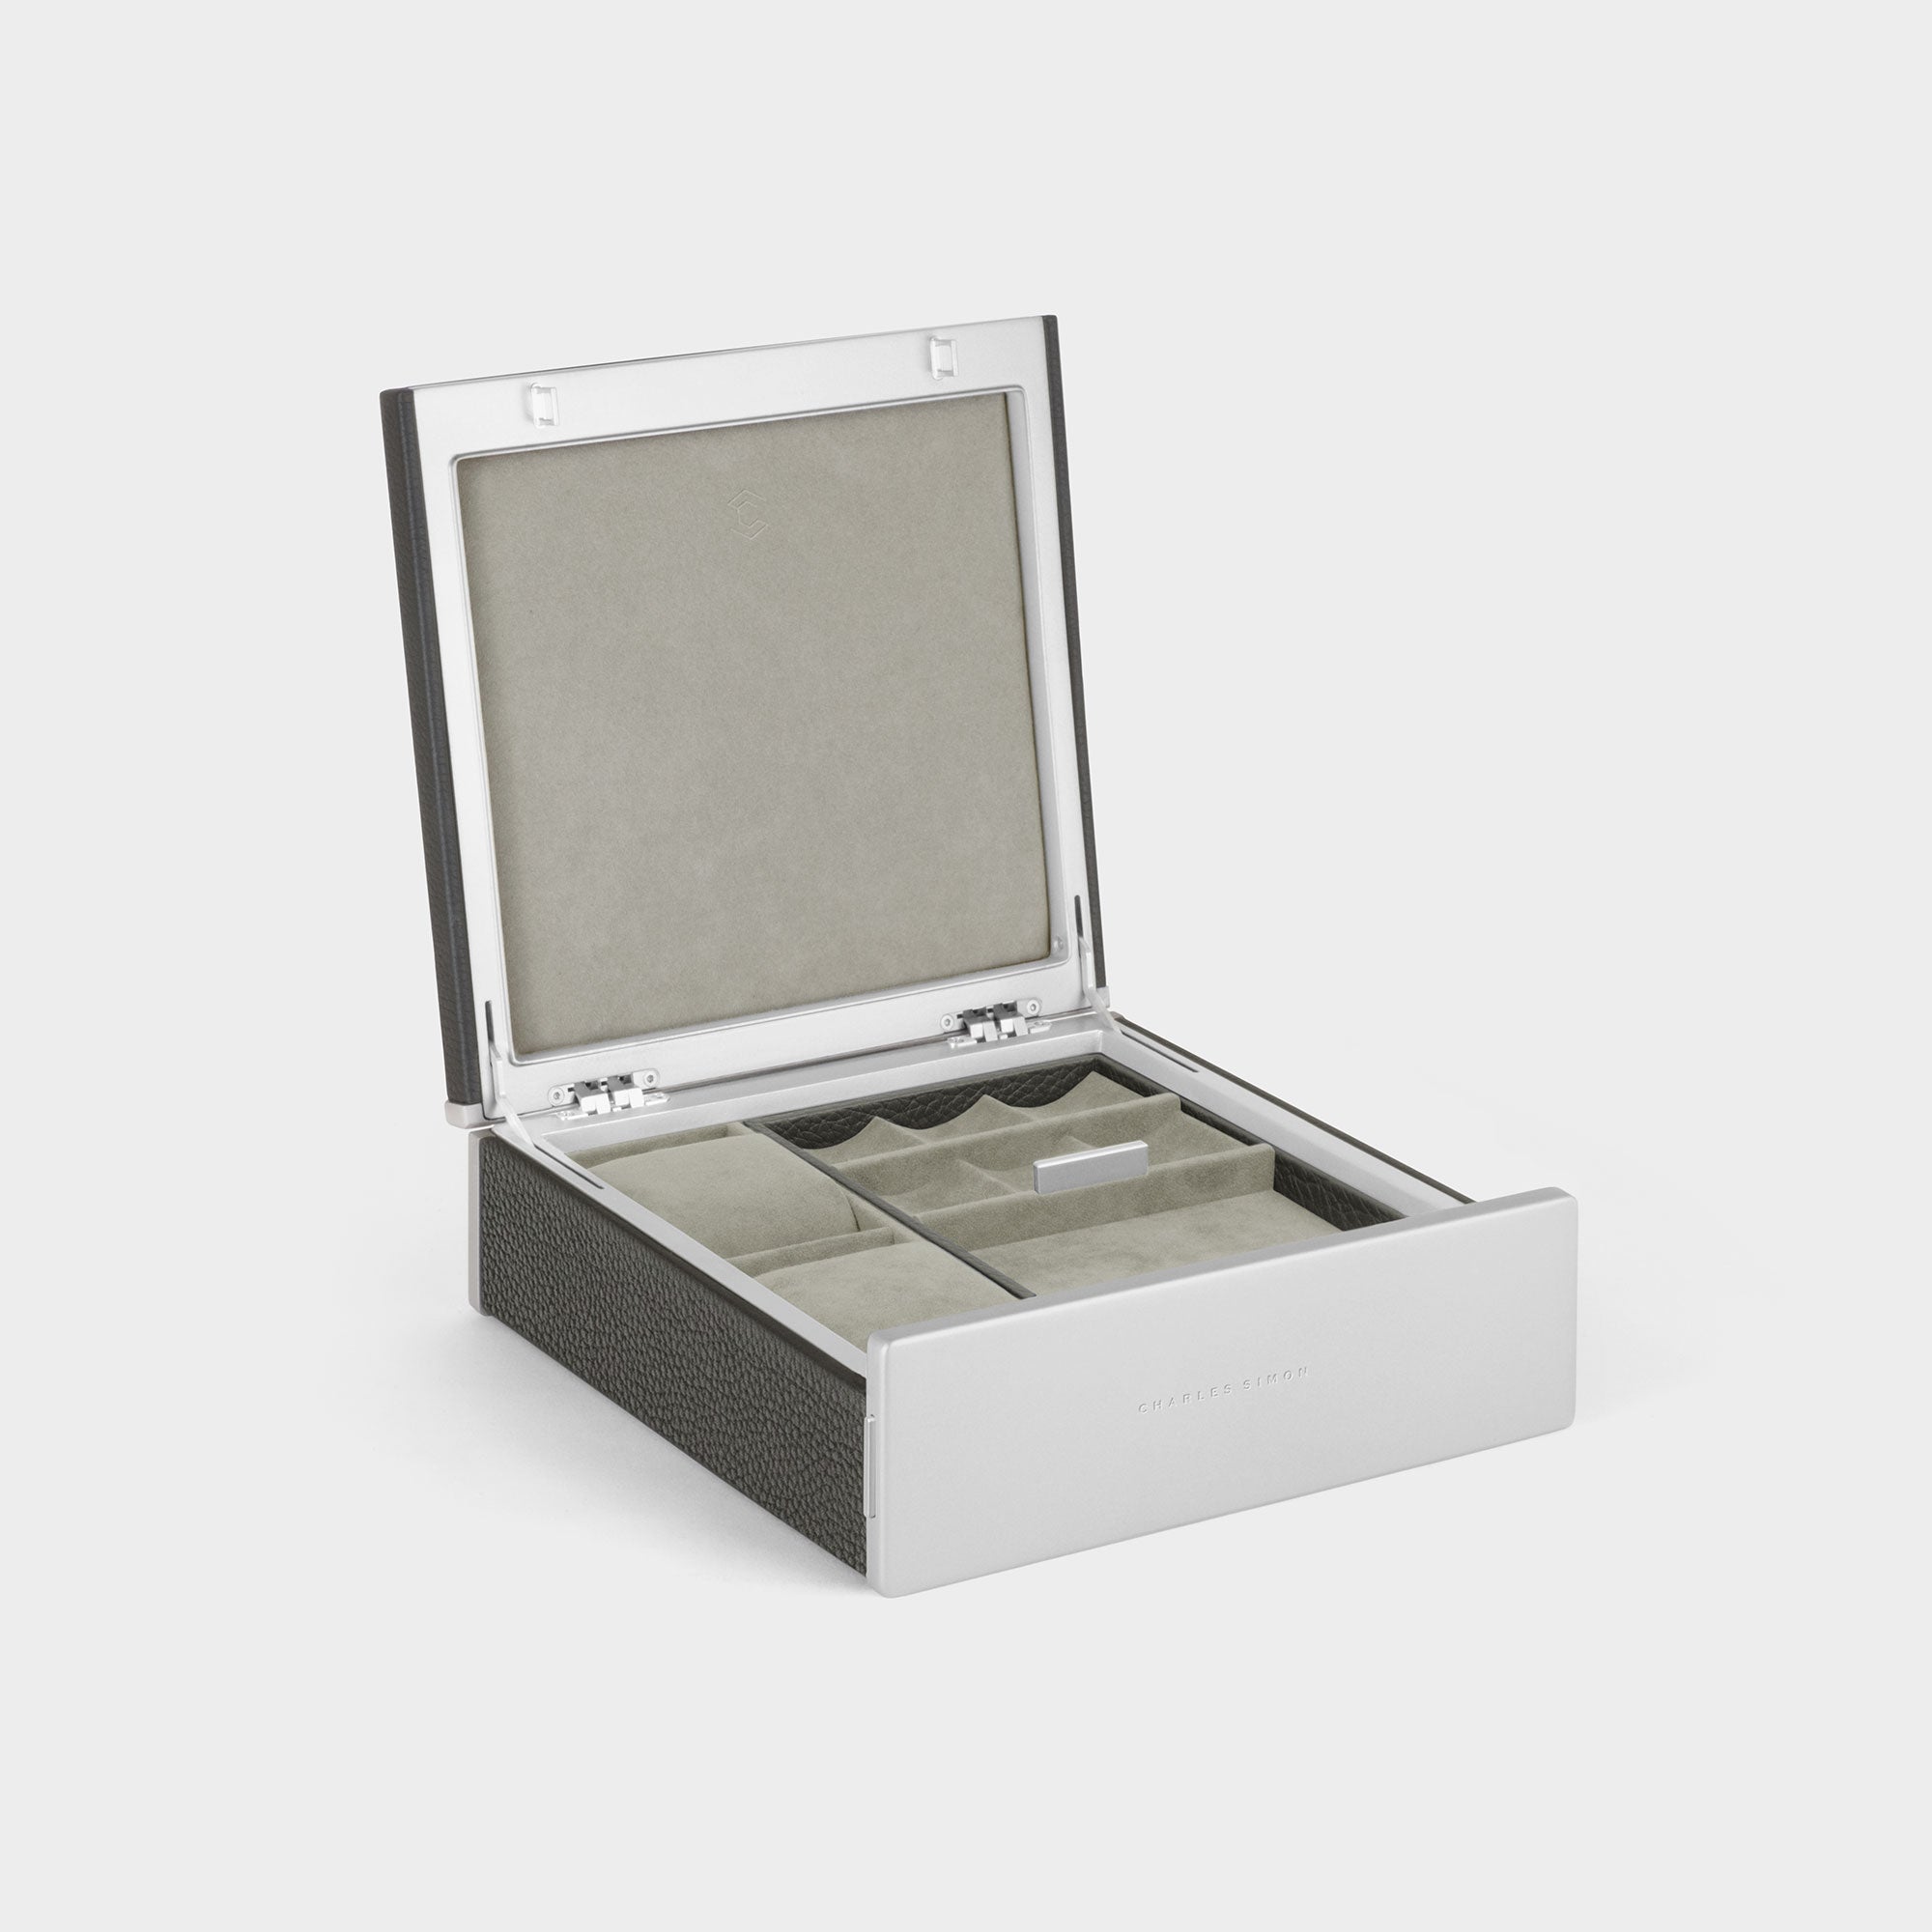 Product photo of open Taylor 2 Watch and Jewelry box in graphite leather and sea sand interior showing jewelry storage compartments and two watch cushions